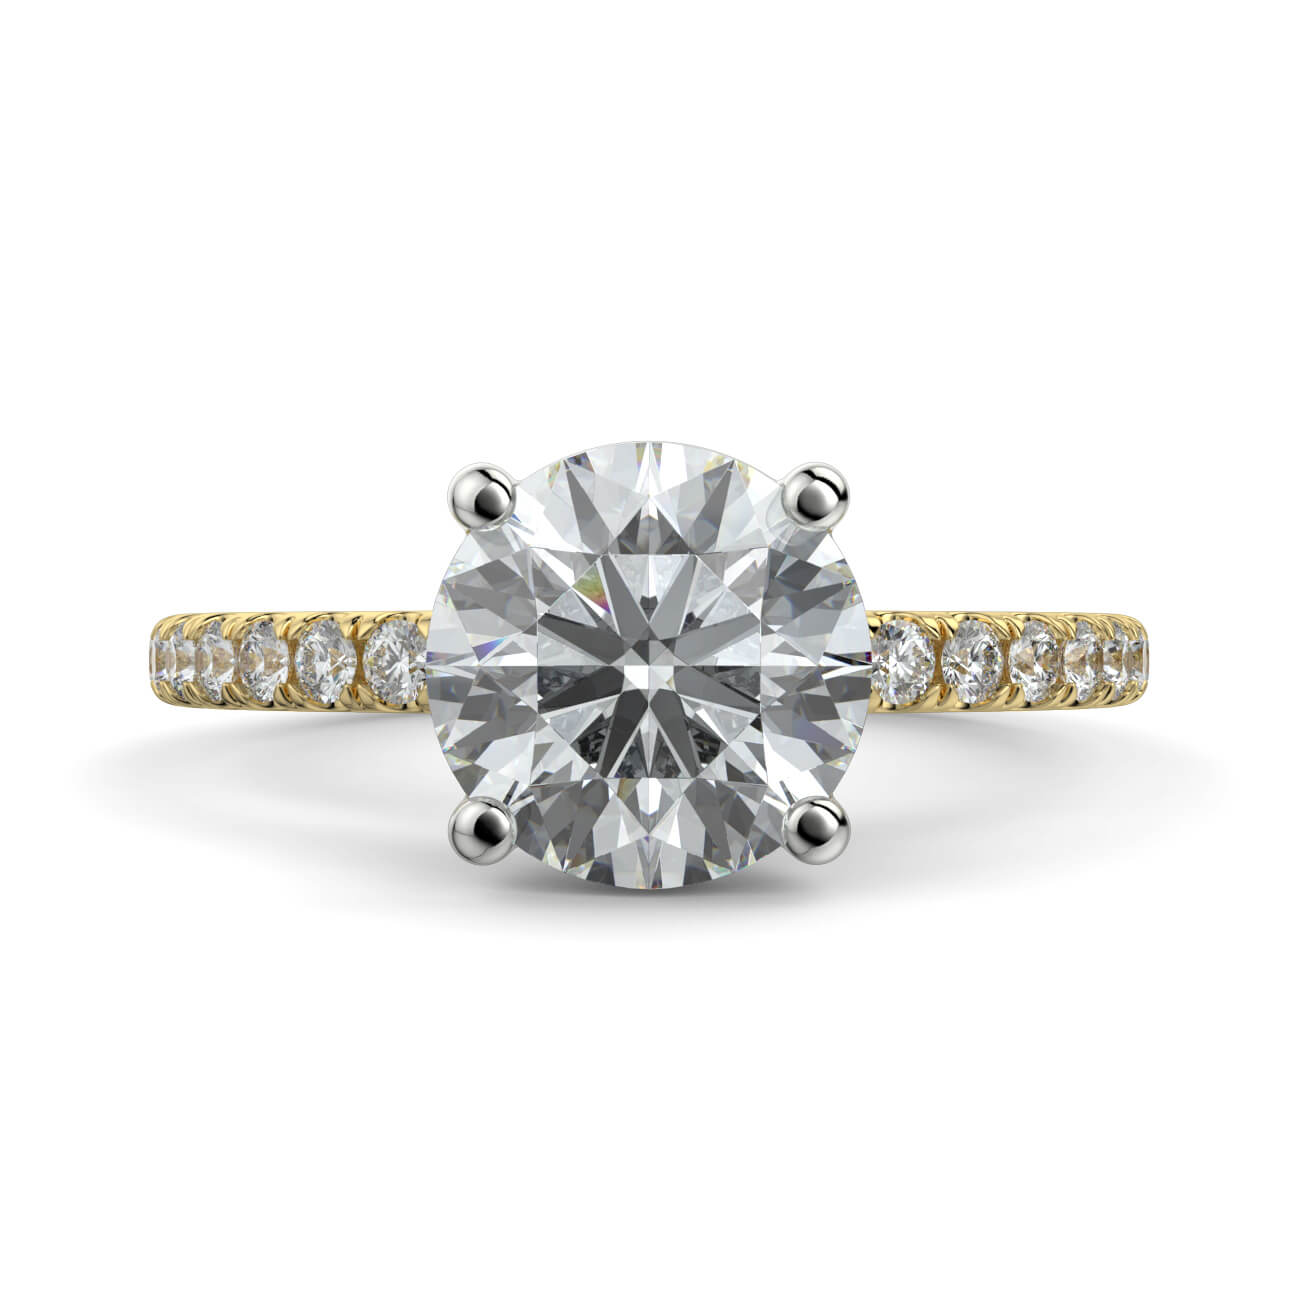 Delicate ‘Liat’ 4 Claw Diamond Engagement Ring in 18k Yellow and White Gold – Australian Diamond Network